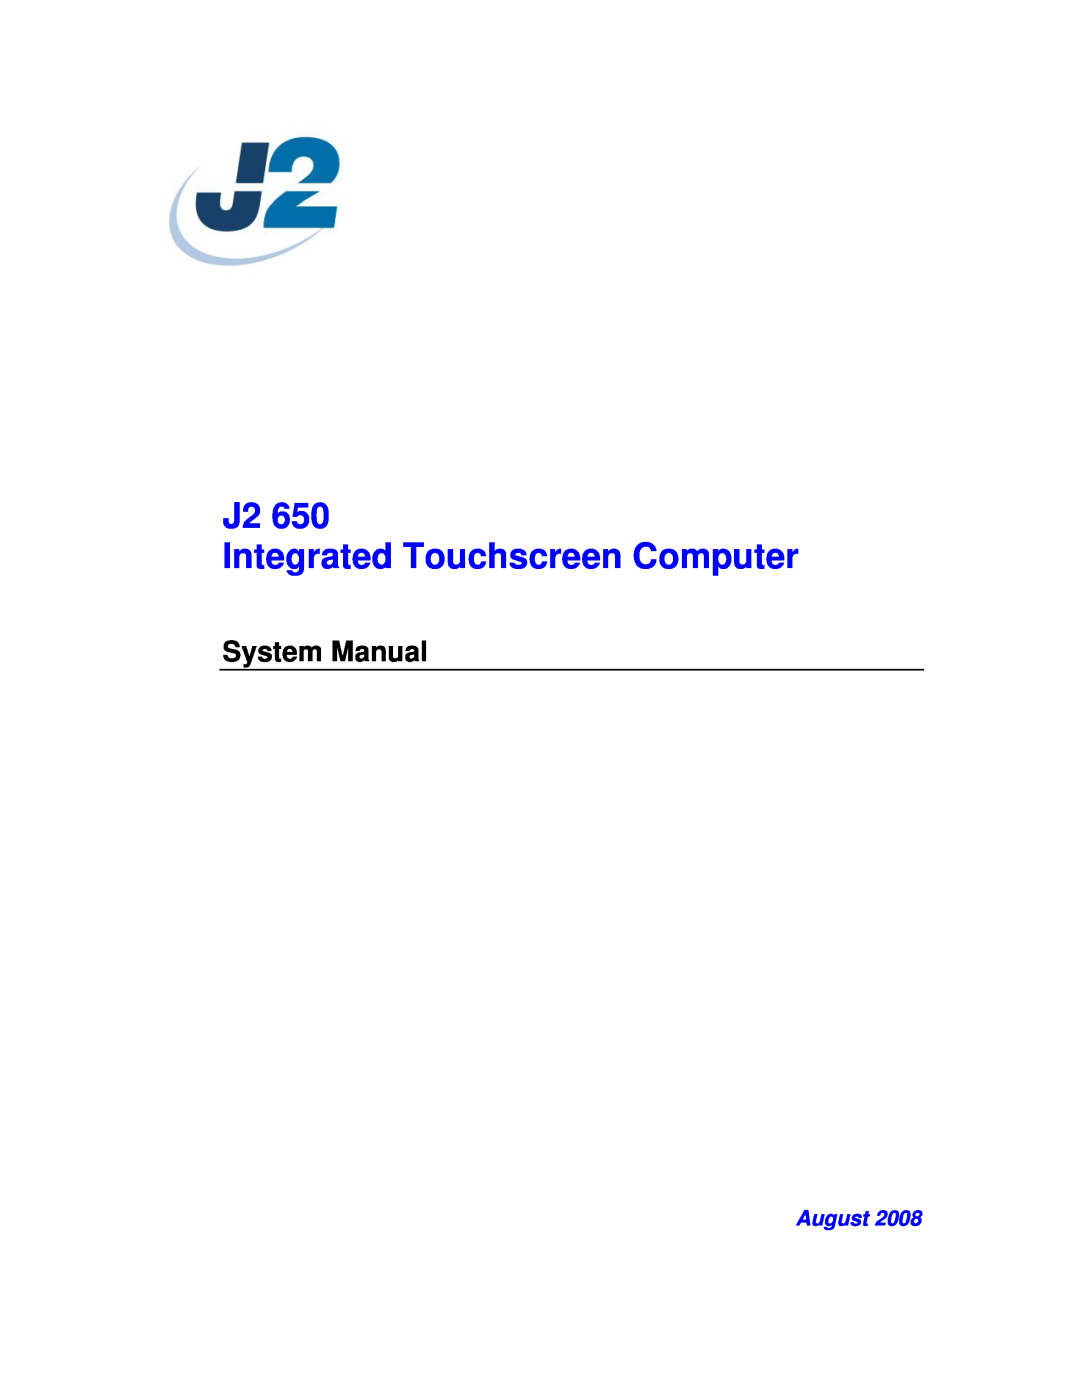 Intel J2 650 system manual J2 Integrated Touchscreen Computer, System Manual, August 